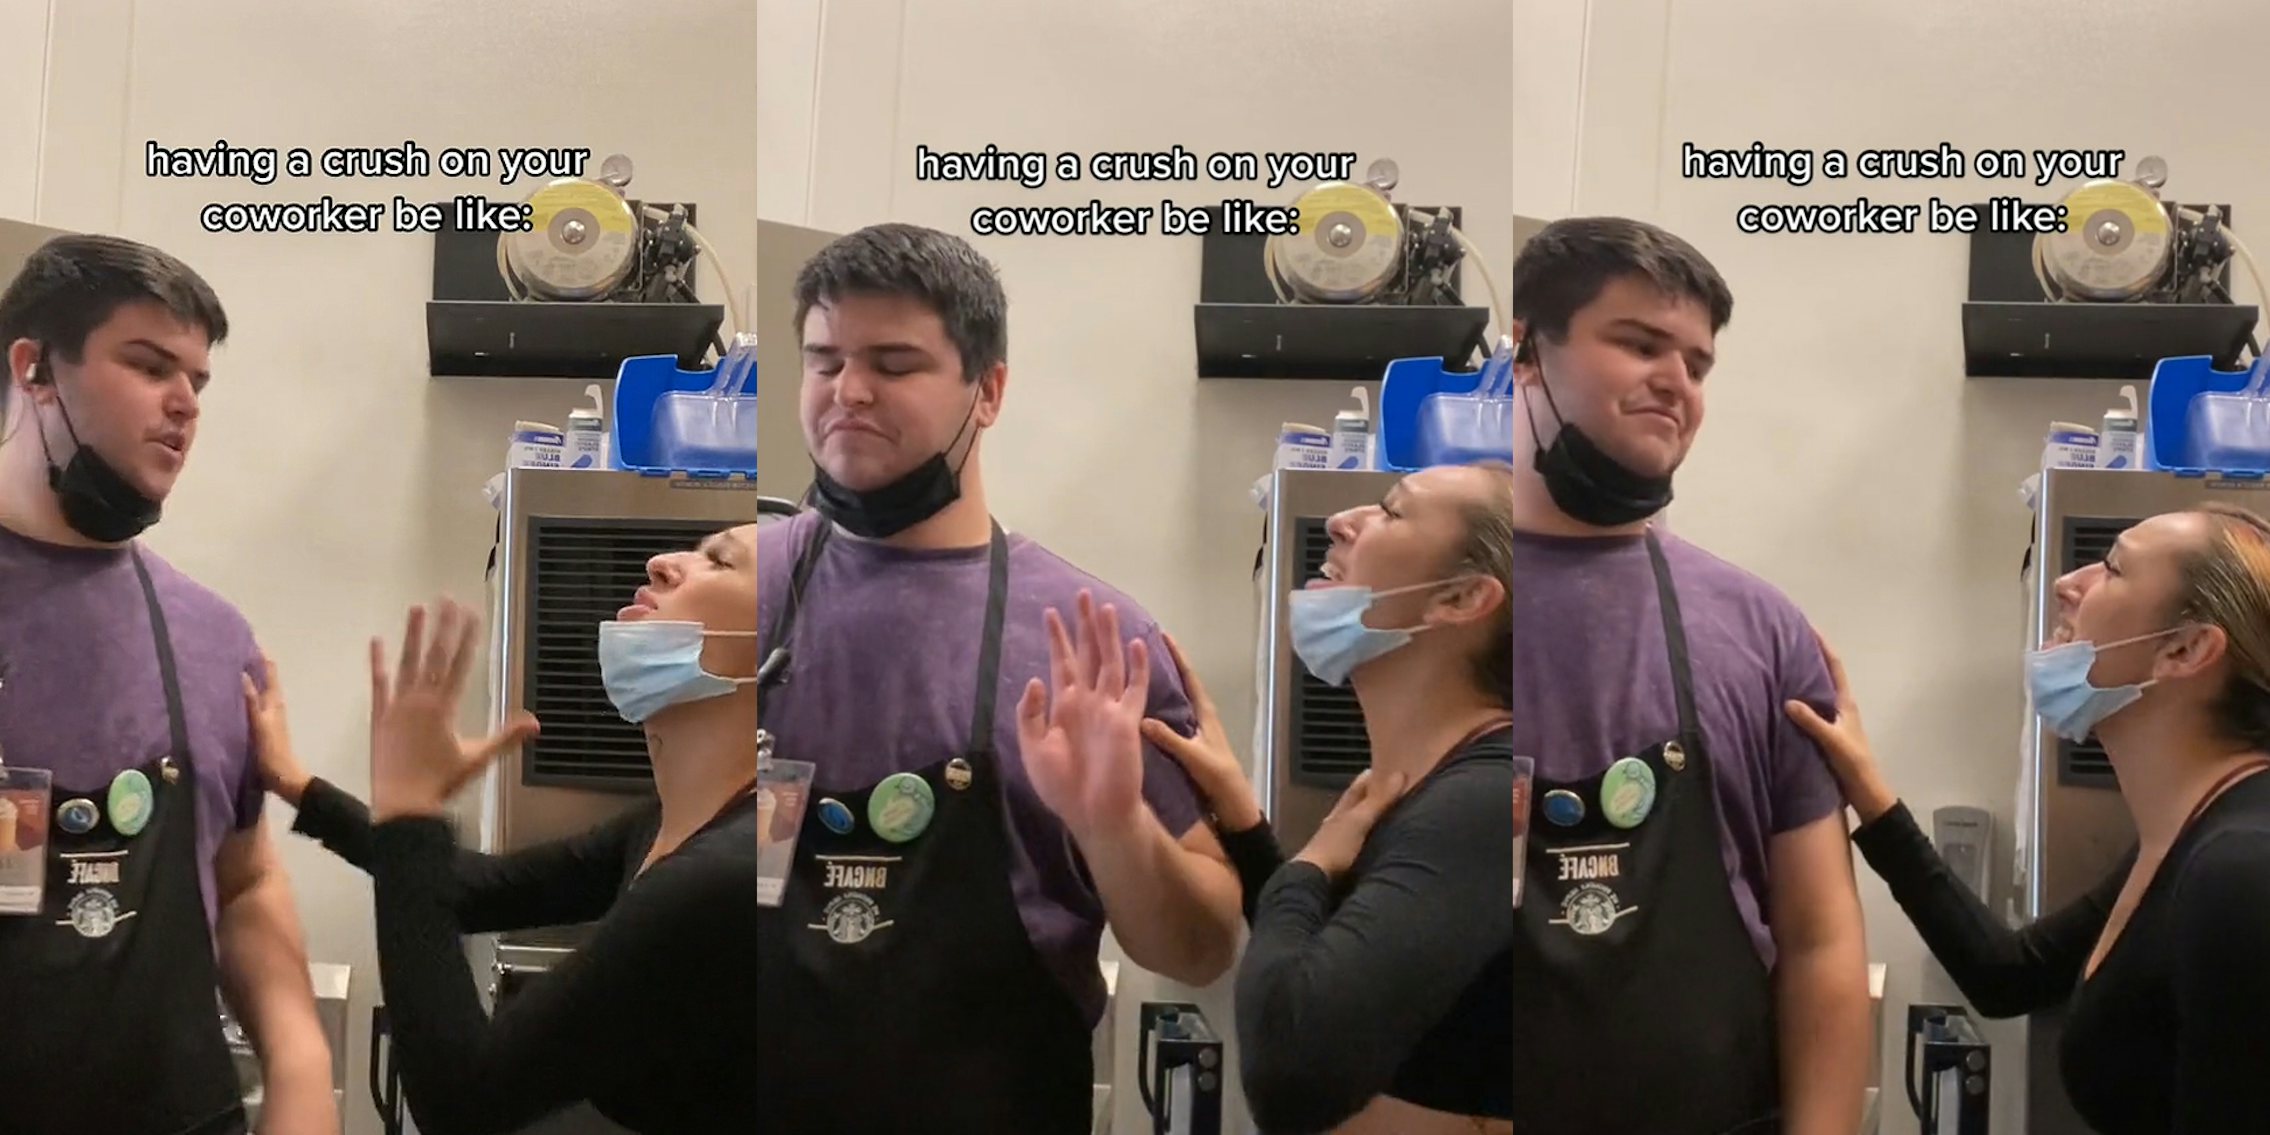 coworkers arguing woman hand on man shoulder other hand up caption 'having a crush on your coworker be like:' (l) coworkers arguing woman hand on man shoulder mans hand up caption 'having a crush on your coworker be like:' (c) coworkers arguing woman hand on man shoulder caption 'having a crush on your coworker be like:' (r)